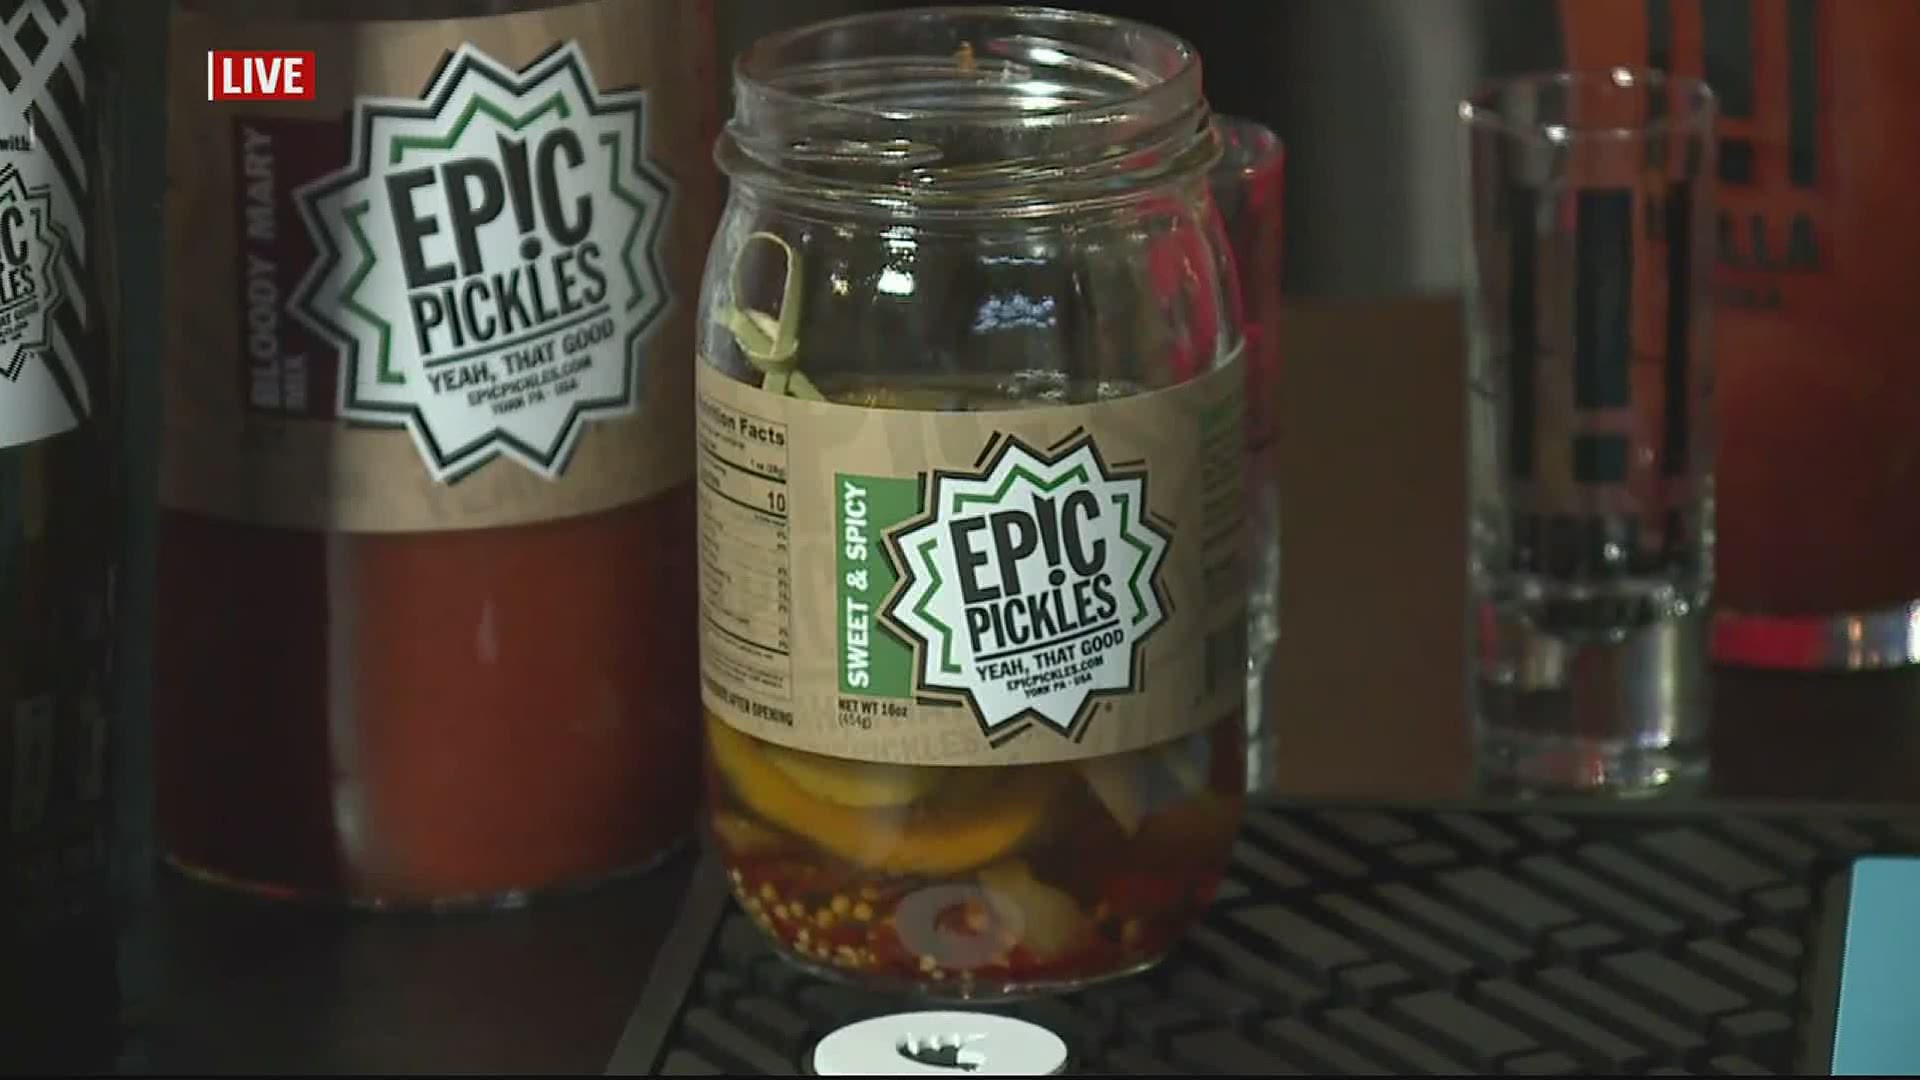 Collaboration between these two York businesses is pretty cool! So a spirits company and a pickle company have joined forces to create a pickle flavored vodka!